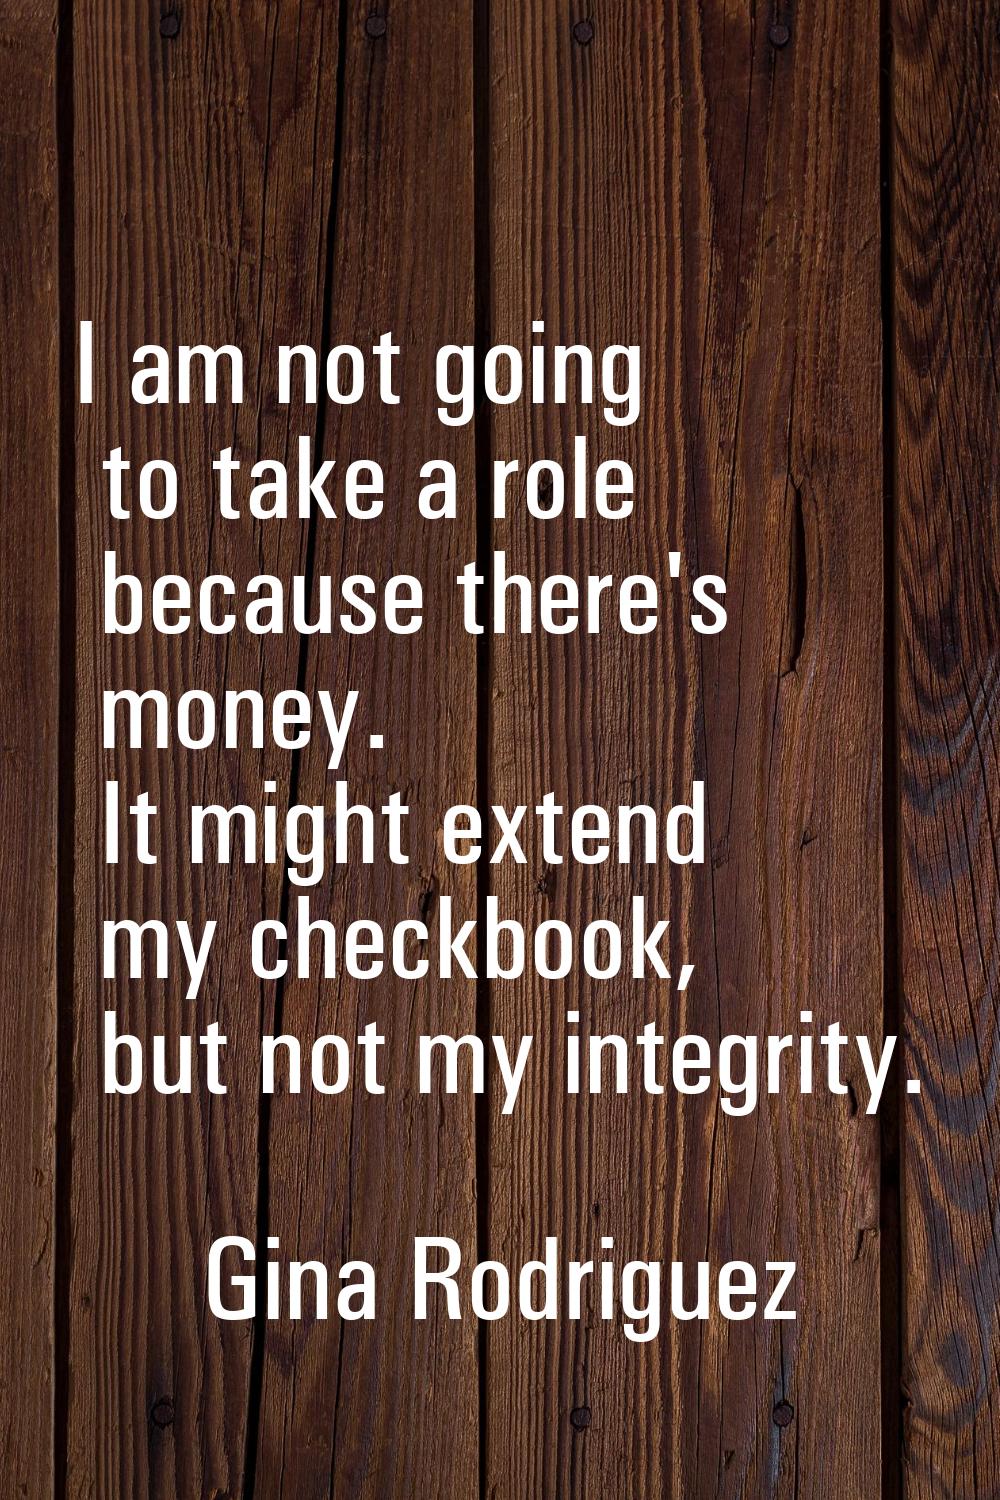 I am not going to take a role because there's money. It might extend my checkbook, but not my integ